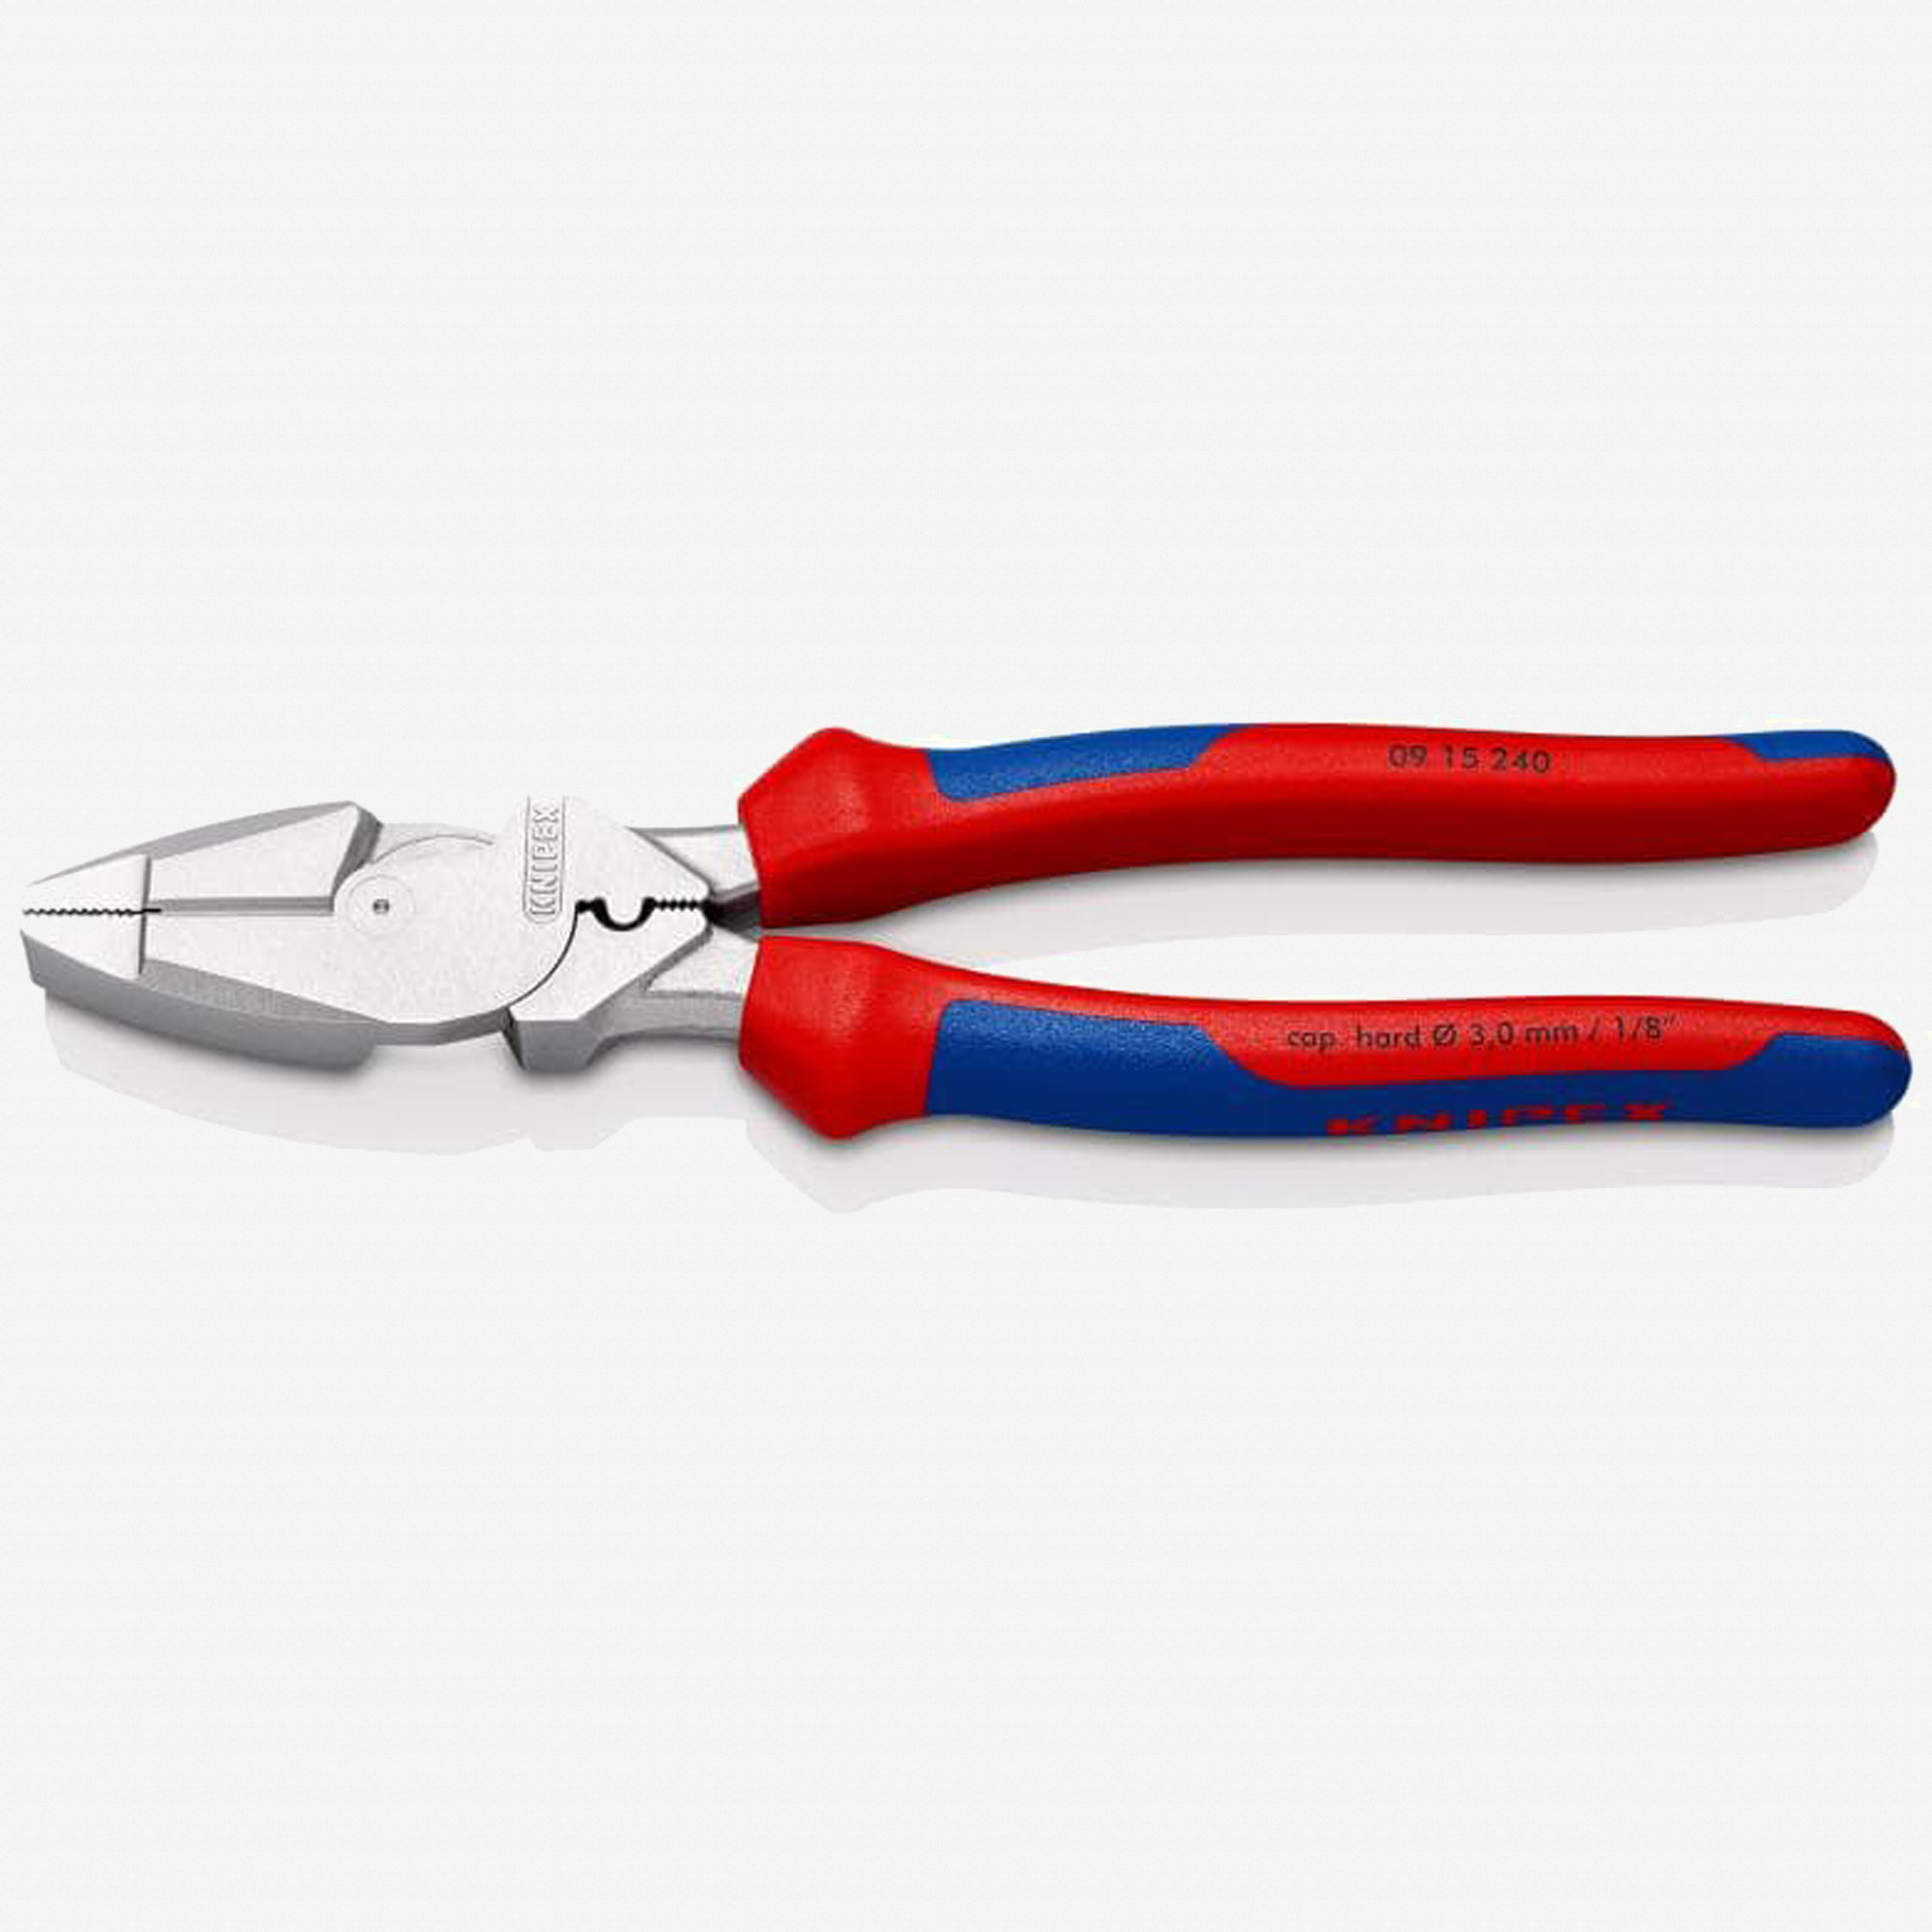 Ideal 9.5 Linesman Plier With Cutter, Crimper and Fish Tape